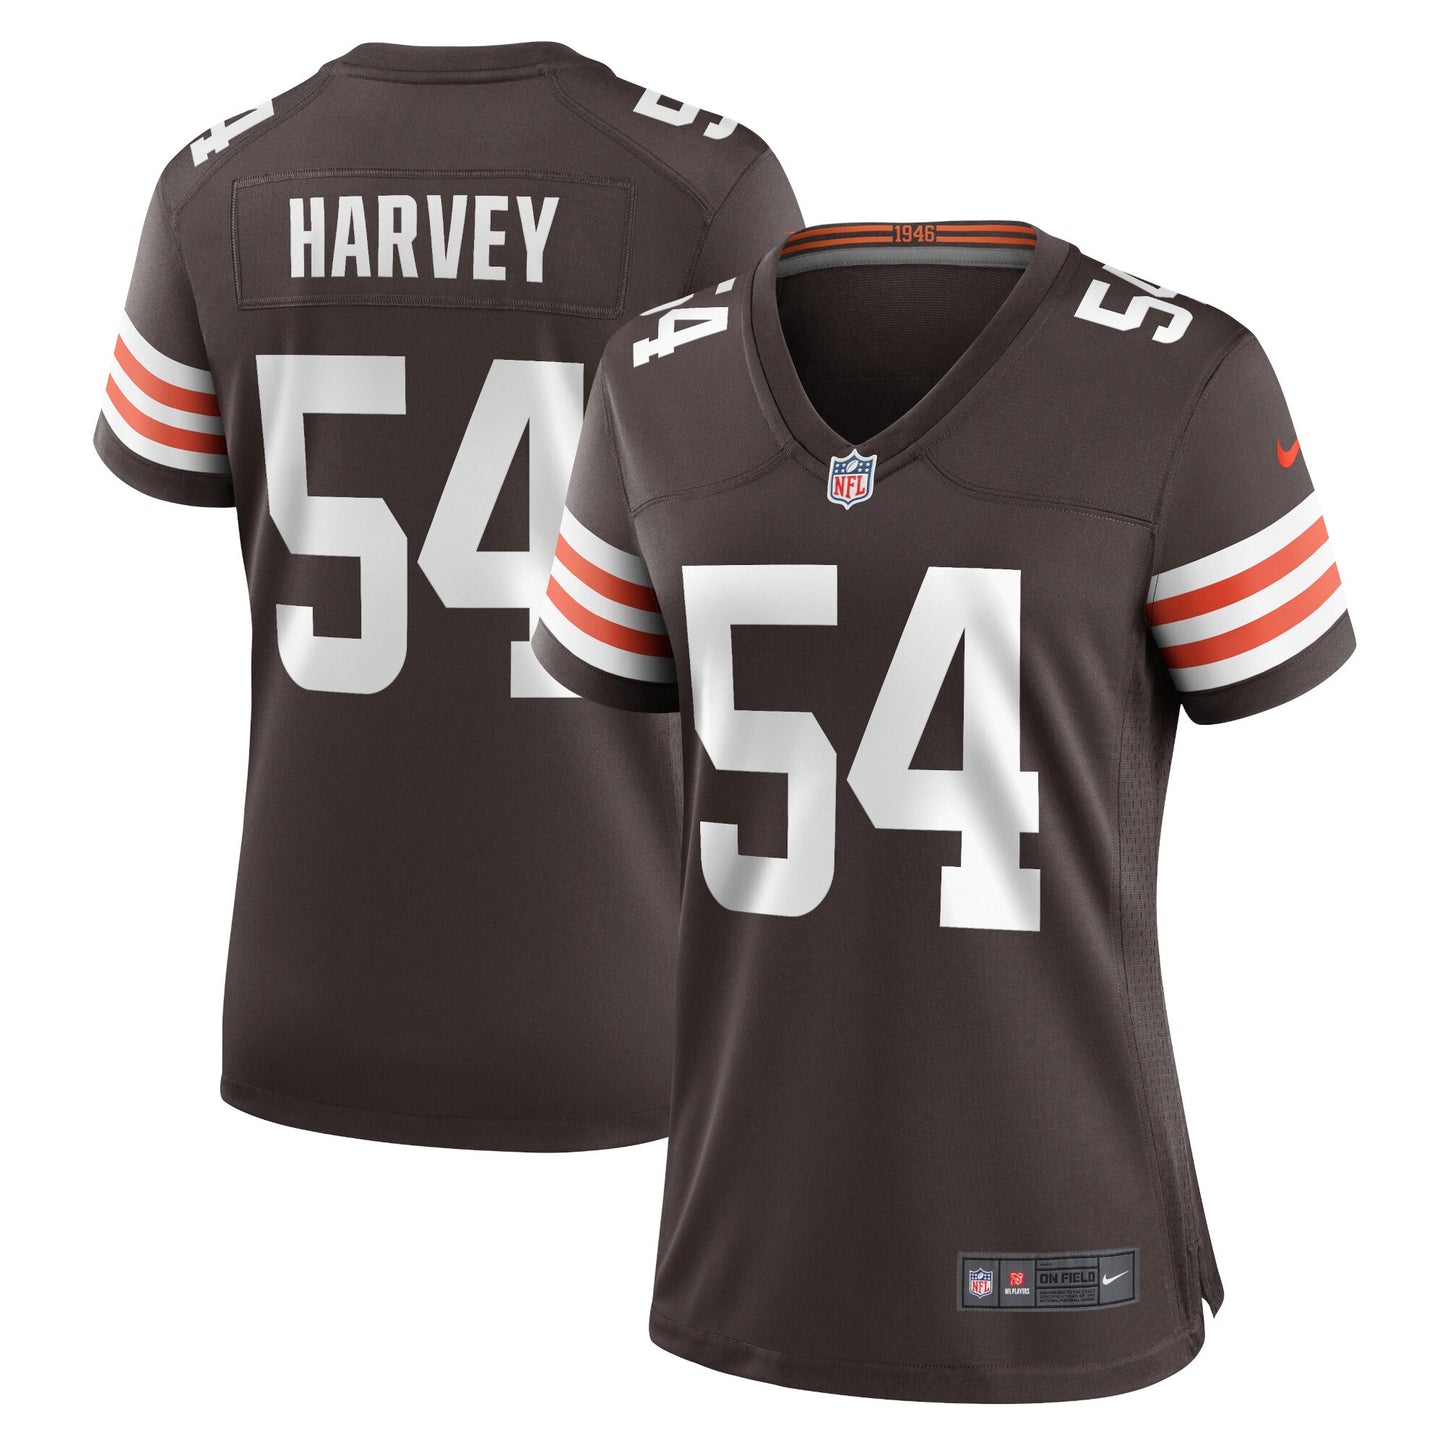 Willie Harvey Cleveland Browns Nike Women's Player Game Jersey - Brown